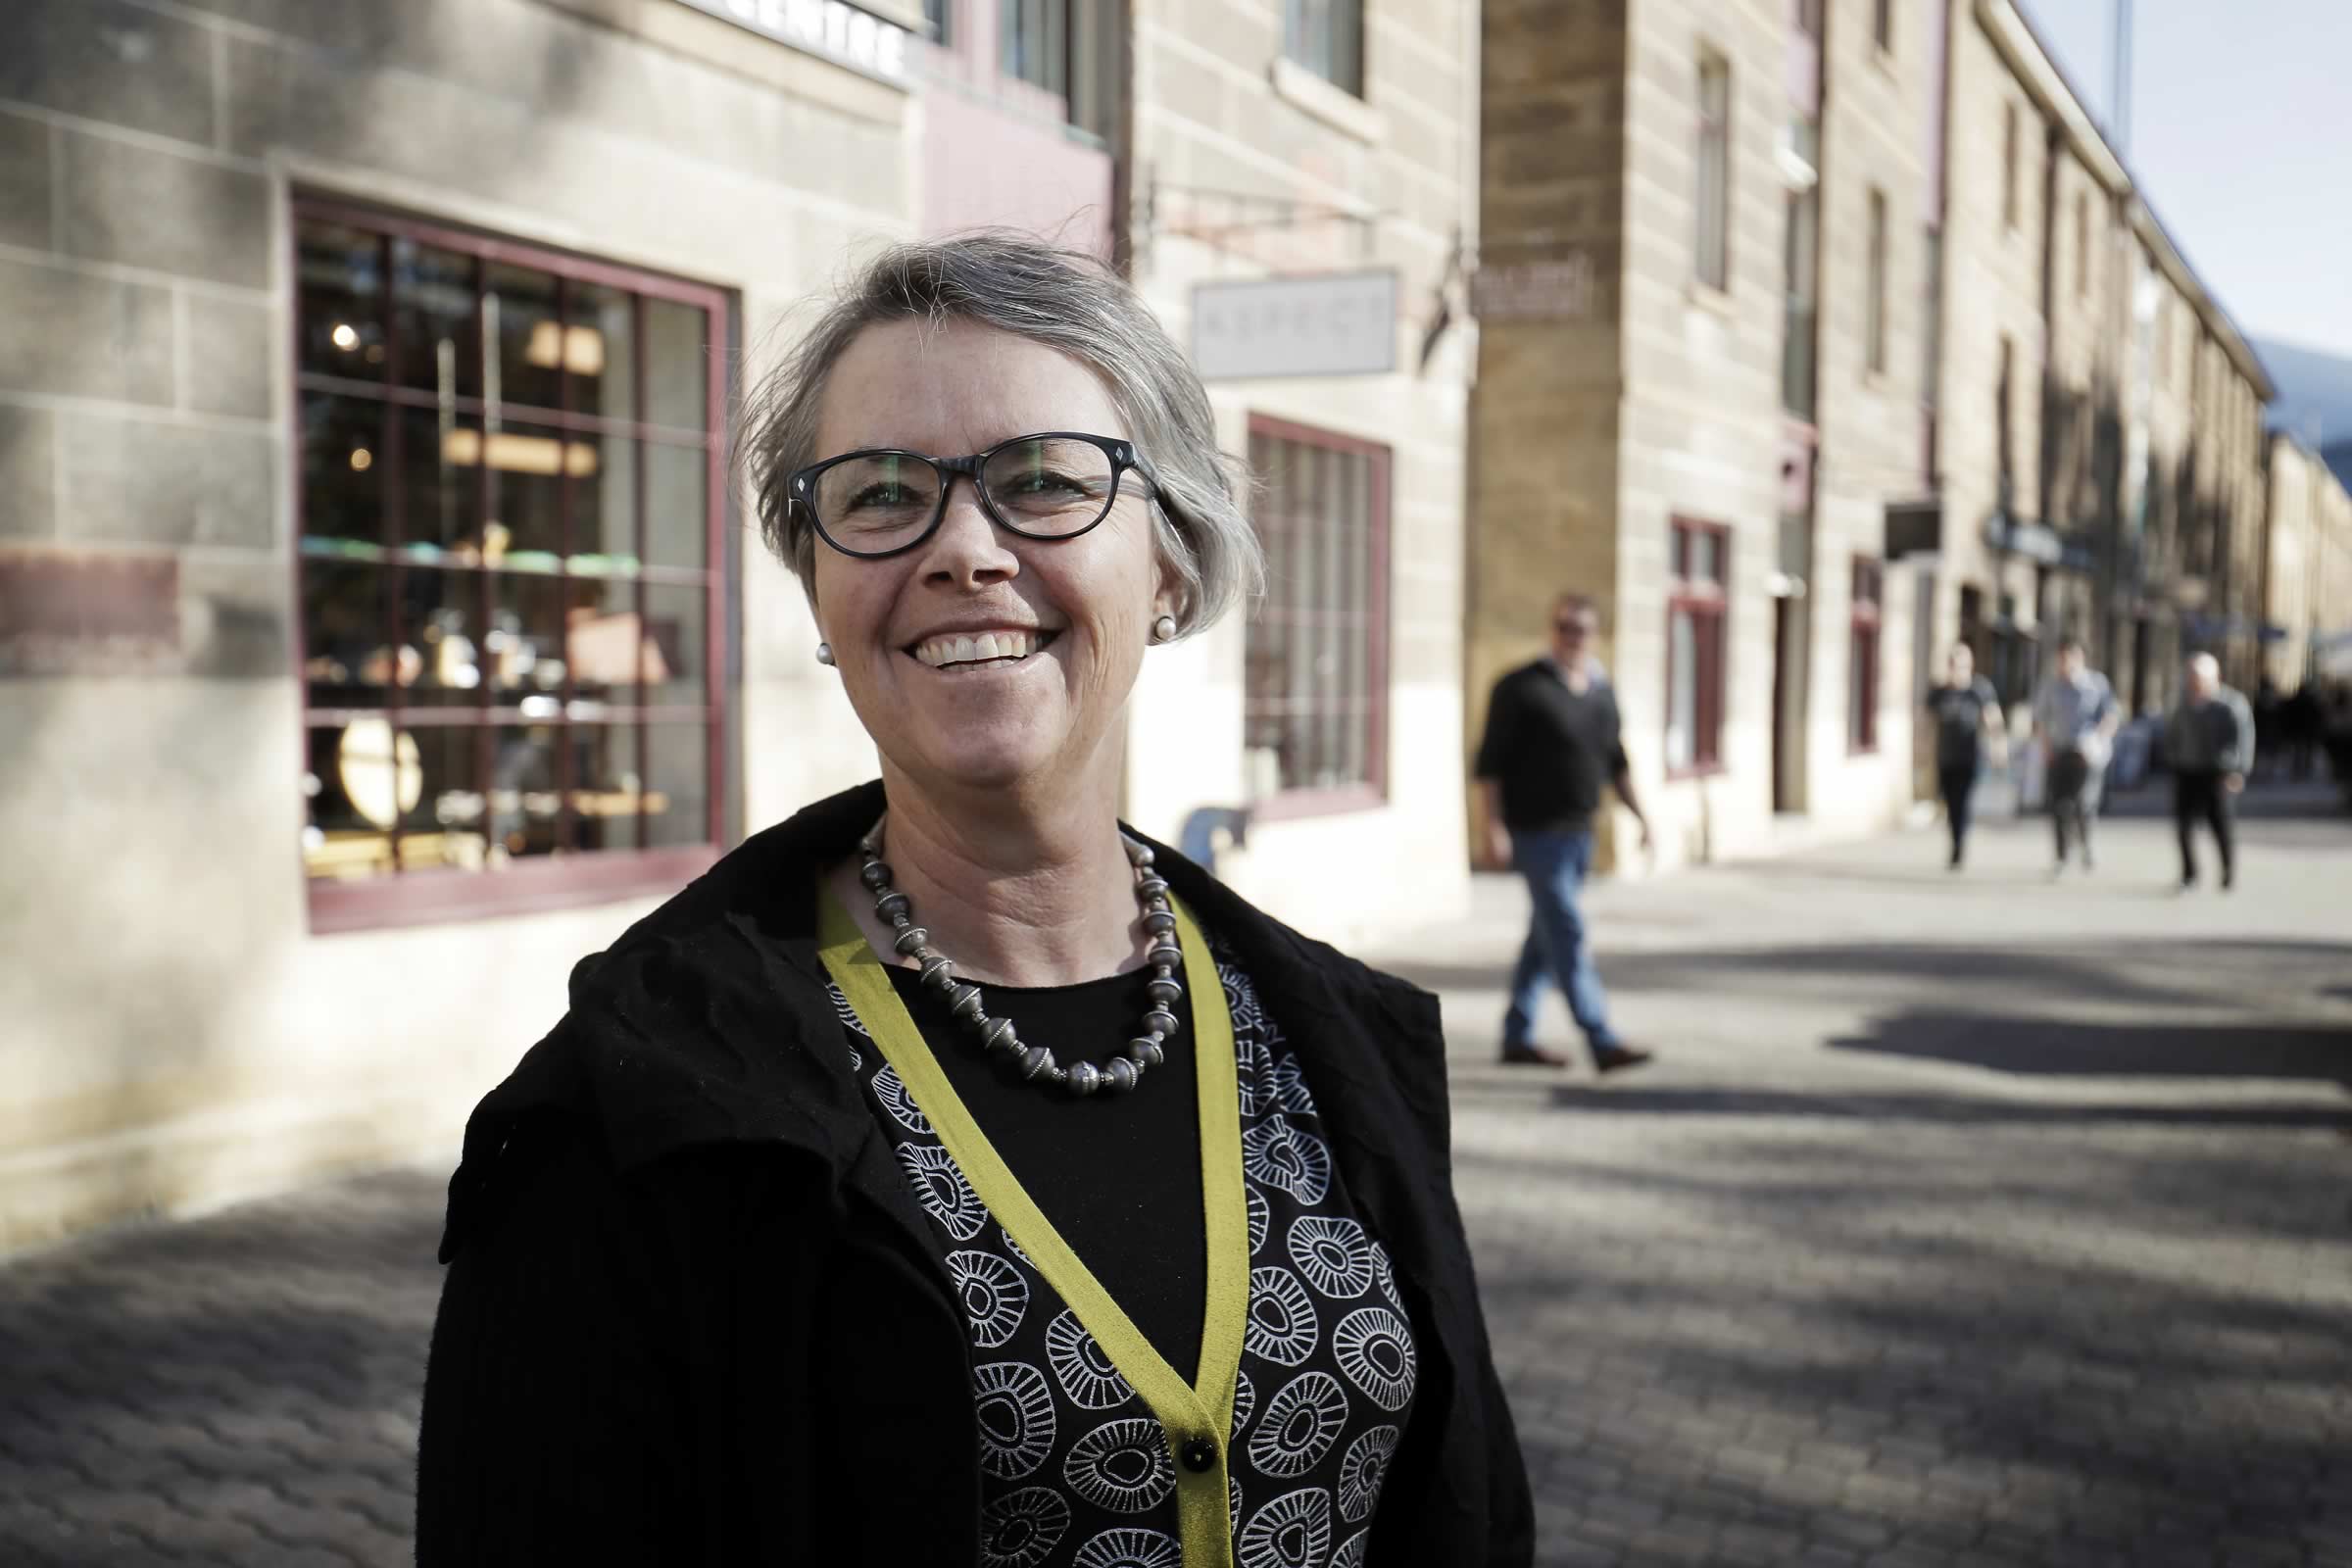 Yvette Breytenbach, Director, Morrison & Breytenbach Architects, is the newly appointed Tasmanian Chapter President of the Australian Institute of Architects.